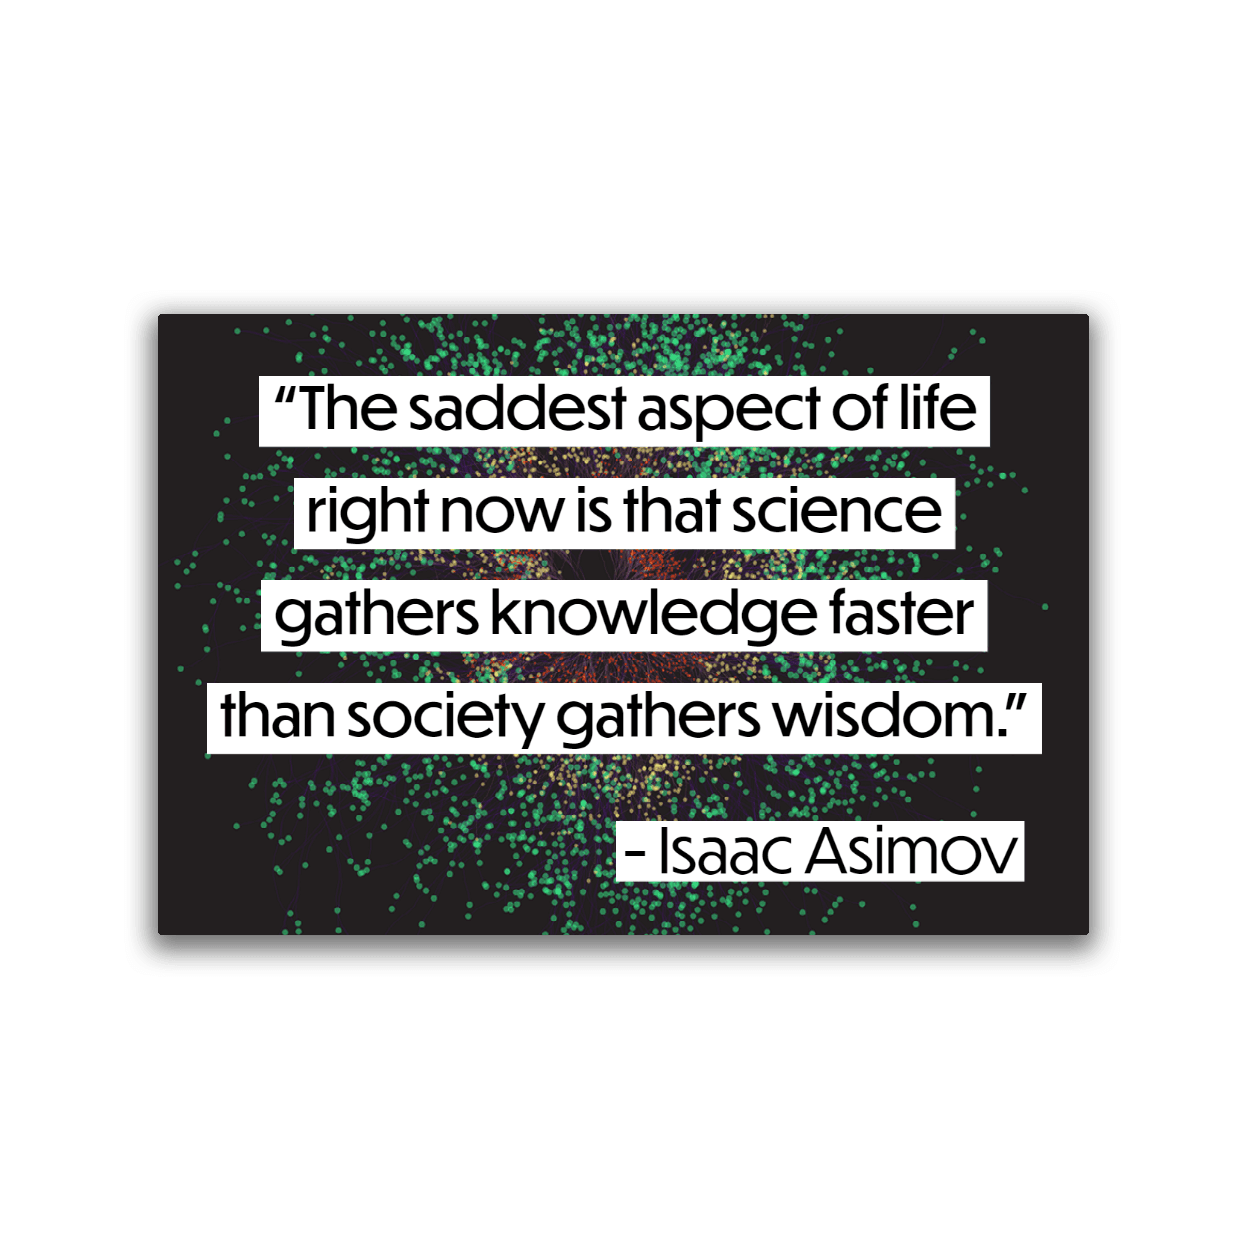 Image of a 2x3 magnet with an Isaac Asimov quote